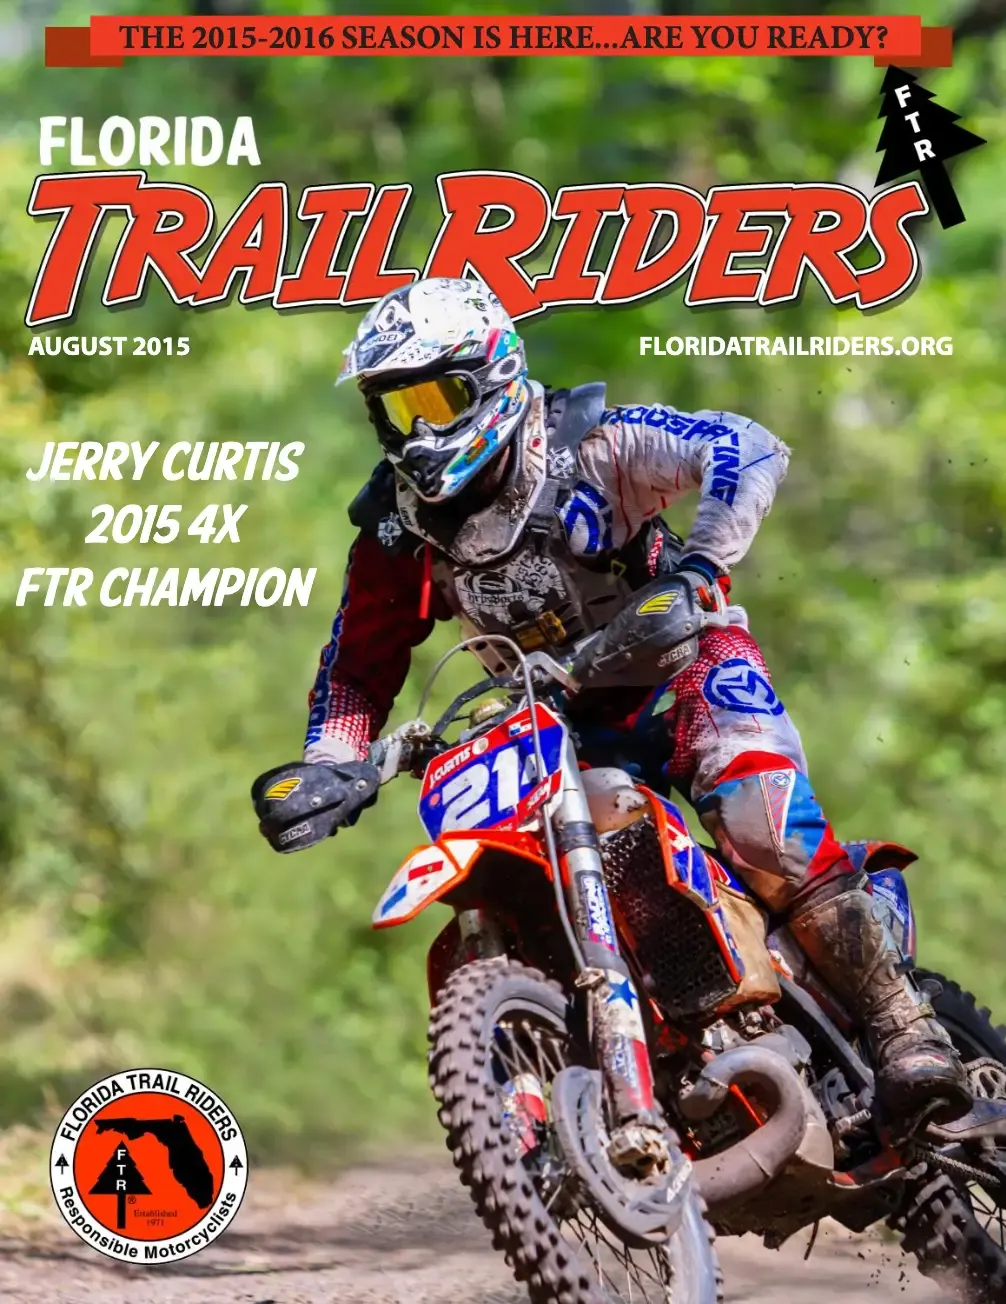 A picture of Jerry Curtis riding his motorcycle on the front of Florida Trail Riders magazine.